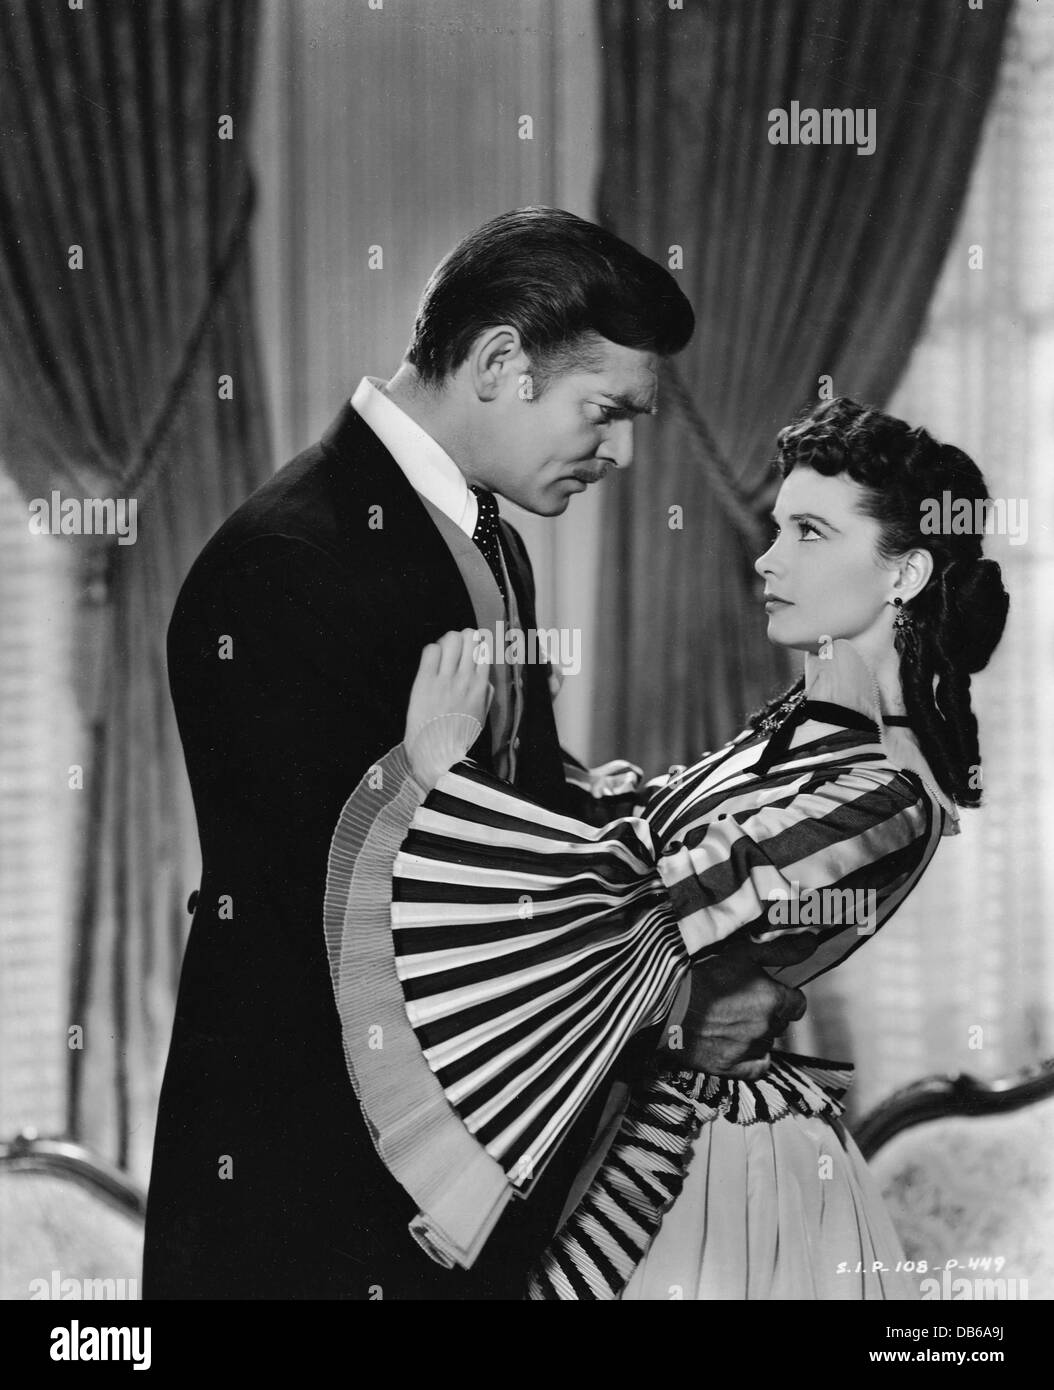 GONE WITH THE WIND Selznick International Pictures, 1939. Directed by Victor Fleming, George Cukor, Sam Wood. Clark Gable, Vivia Stock Photo